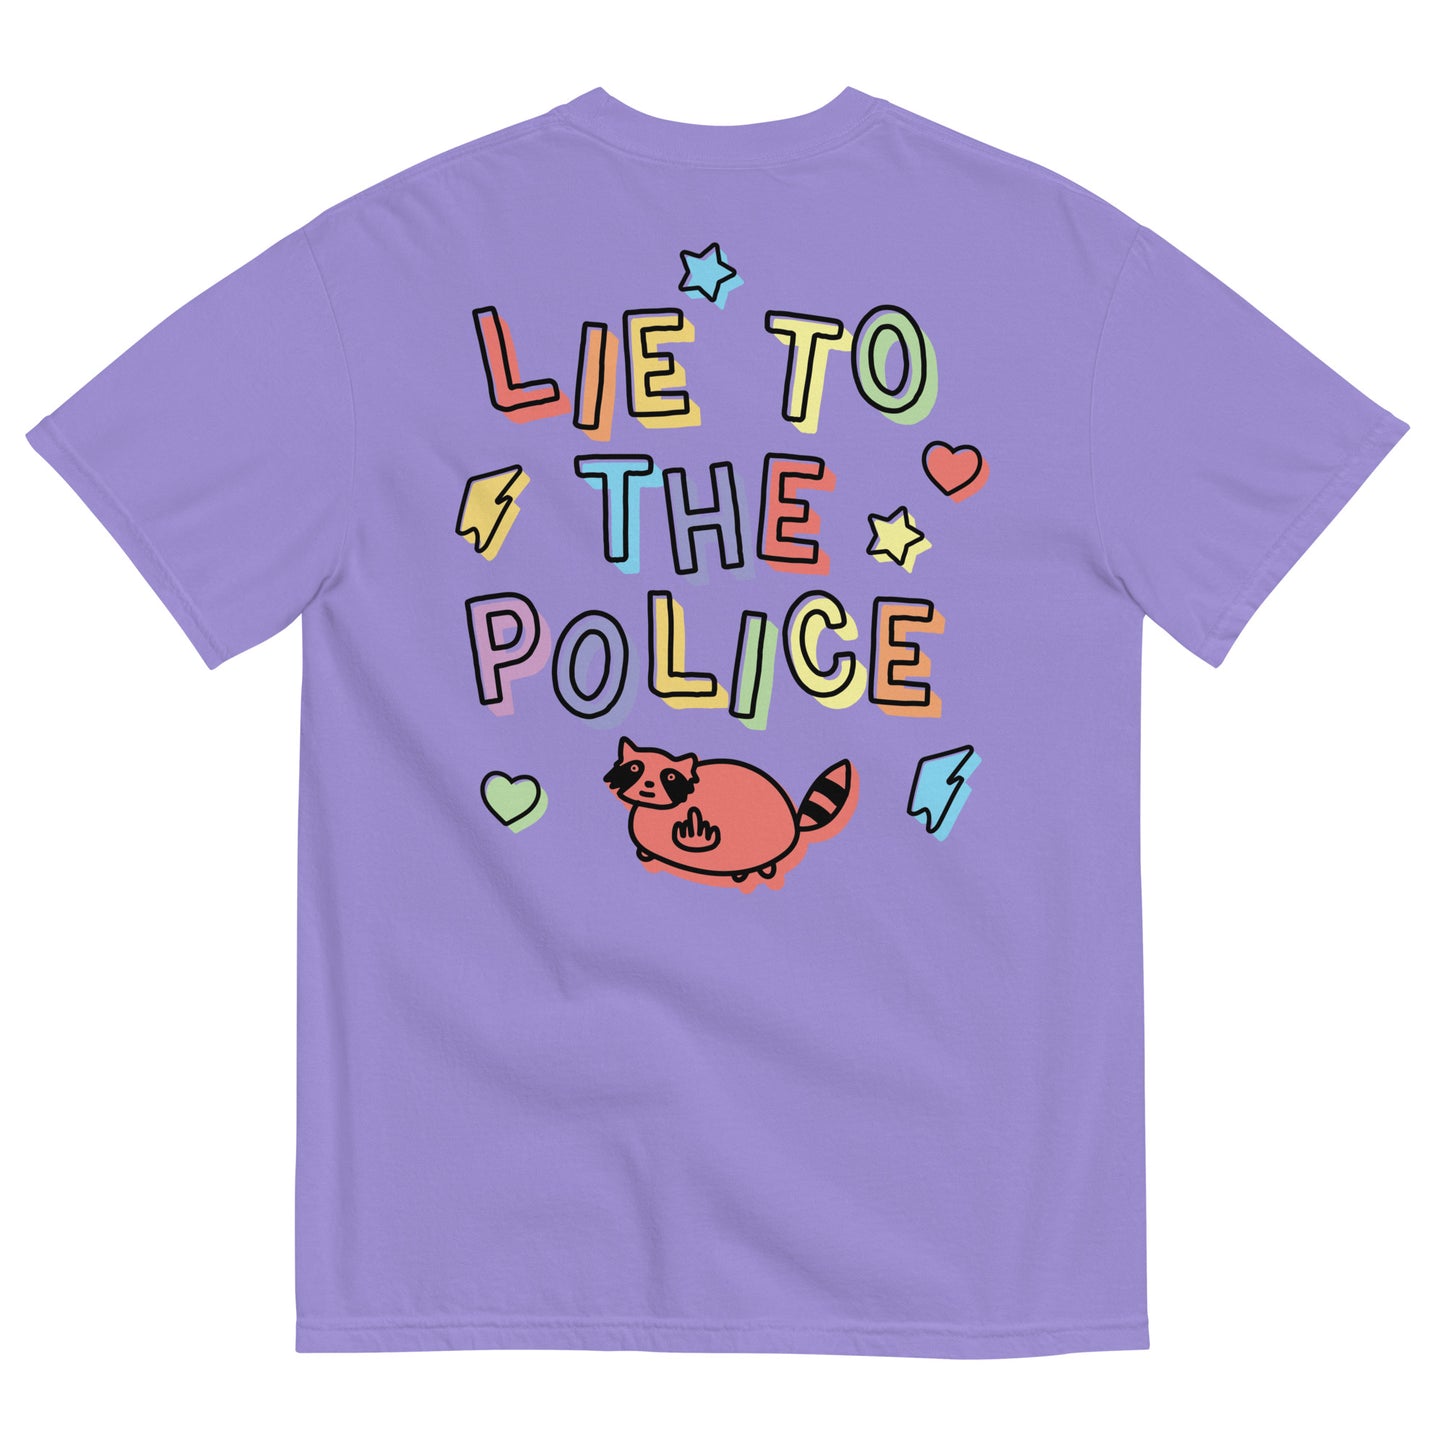 Lie to the Police (front & back) Unisex Comfort Colors t-shirt